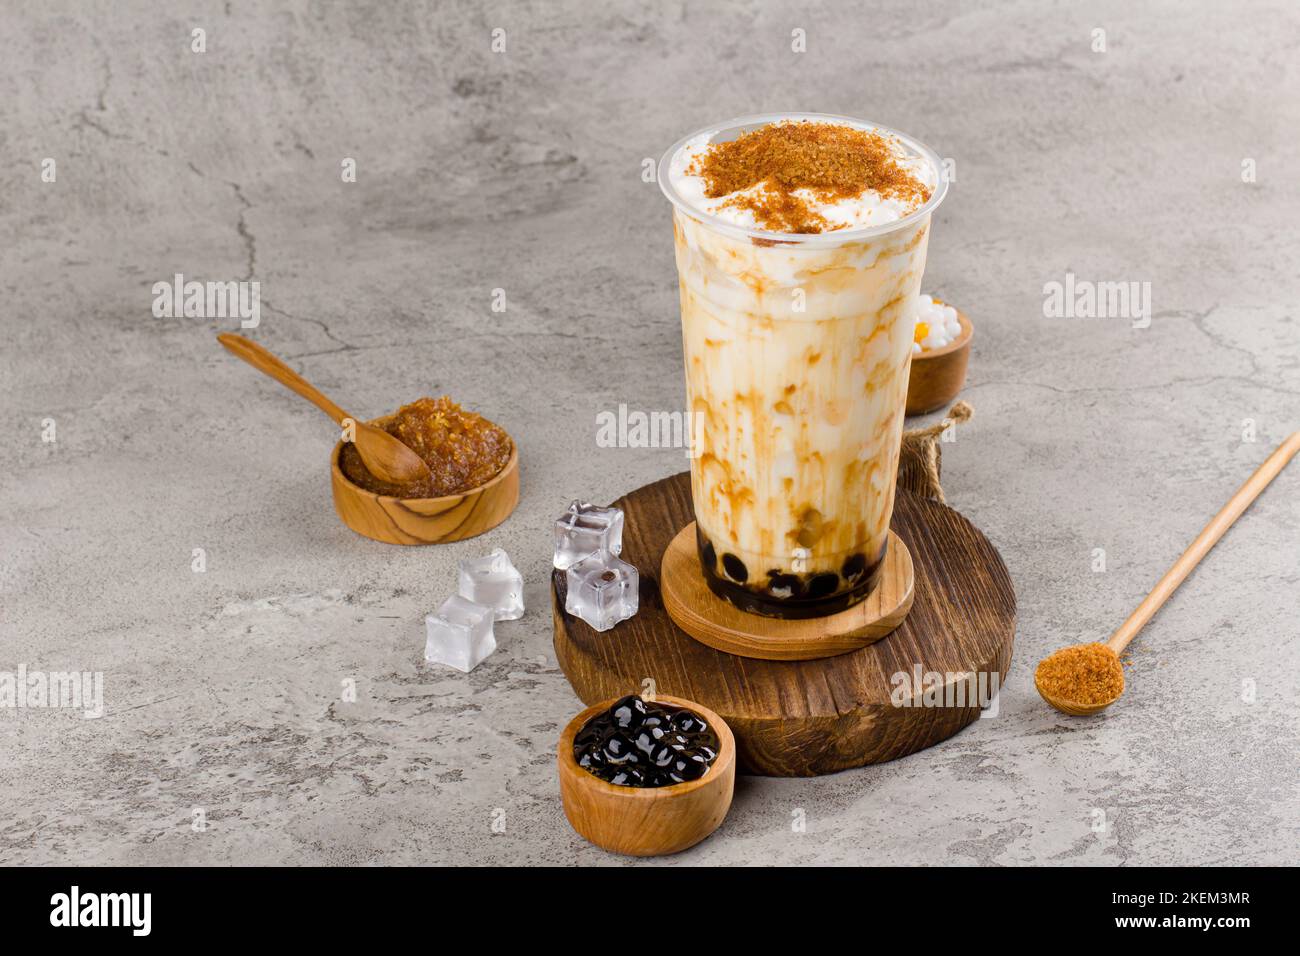 Get a Brown Sugar Boba Latte at Houston's Newest Taiwanese